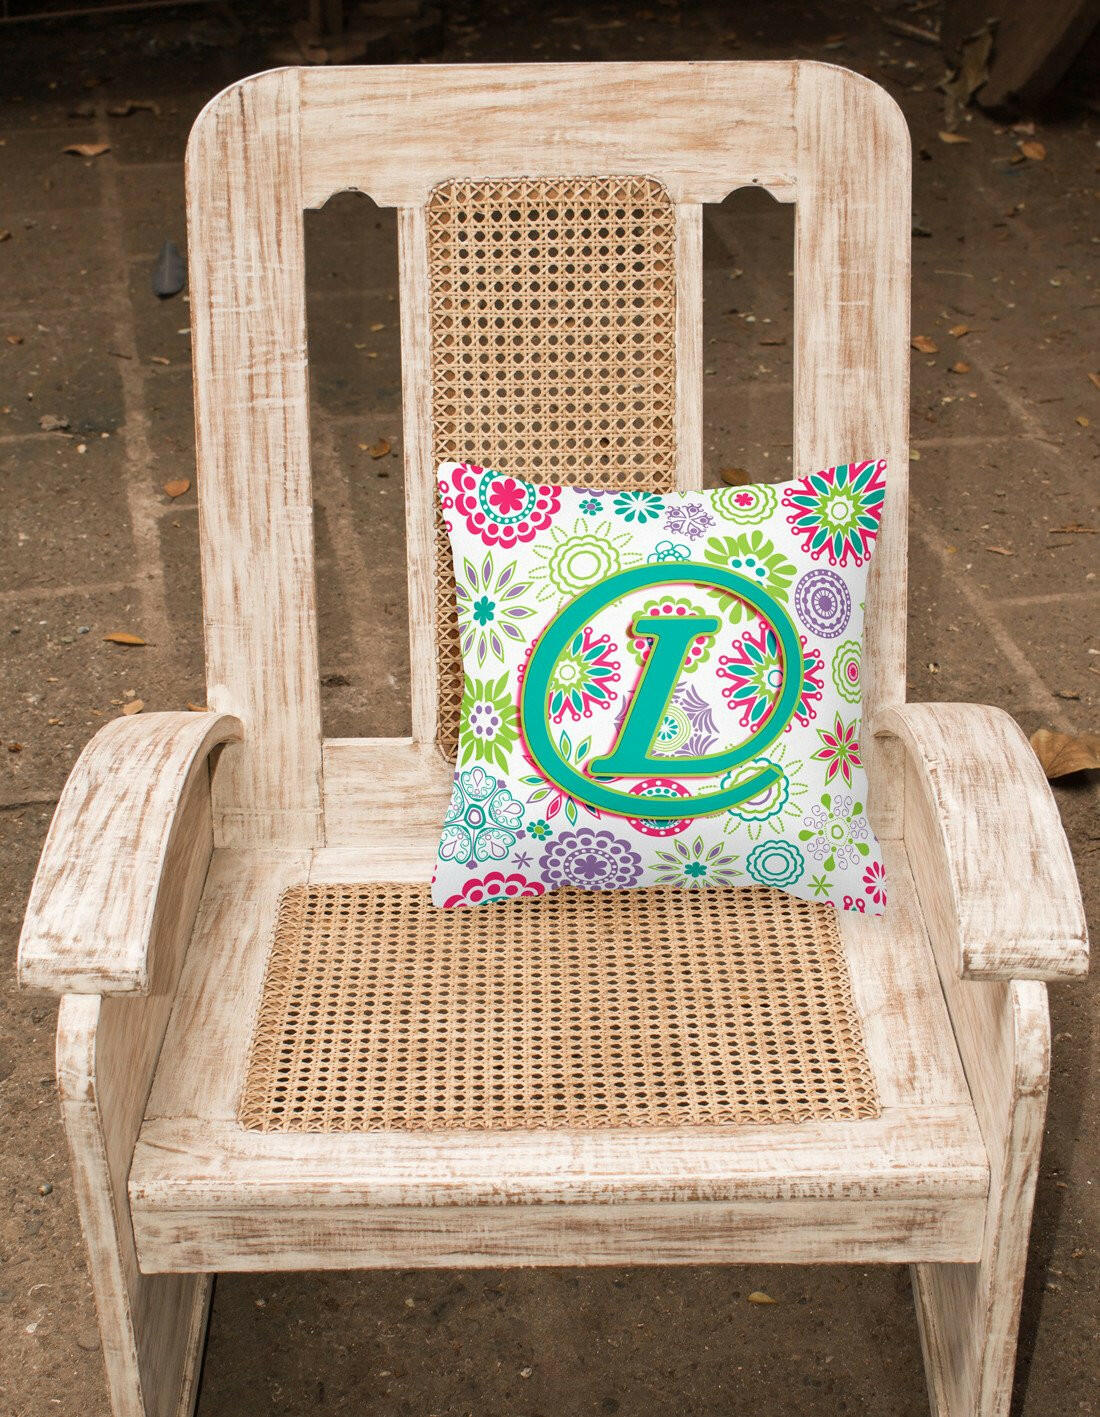 Letter L Flowers Pink Teal Green Initial Canvas Fabric Decorative Pillow CJ2011-LPW1414 by Caroline's Treasures